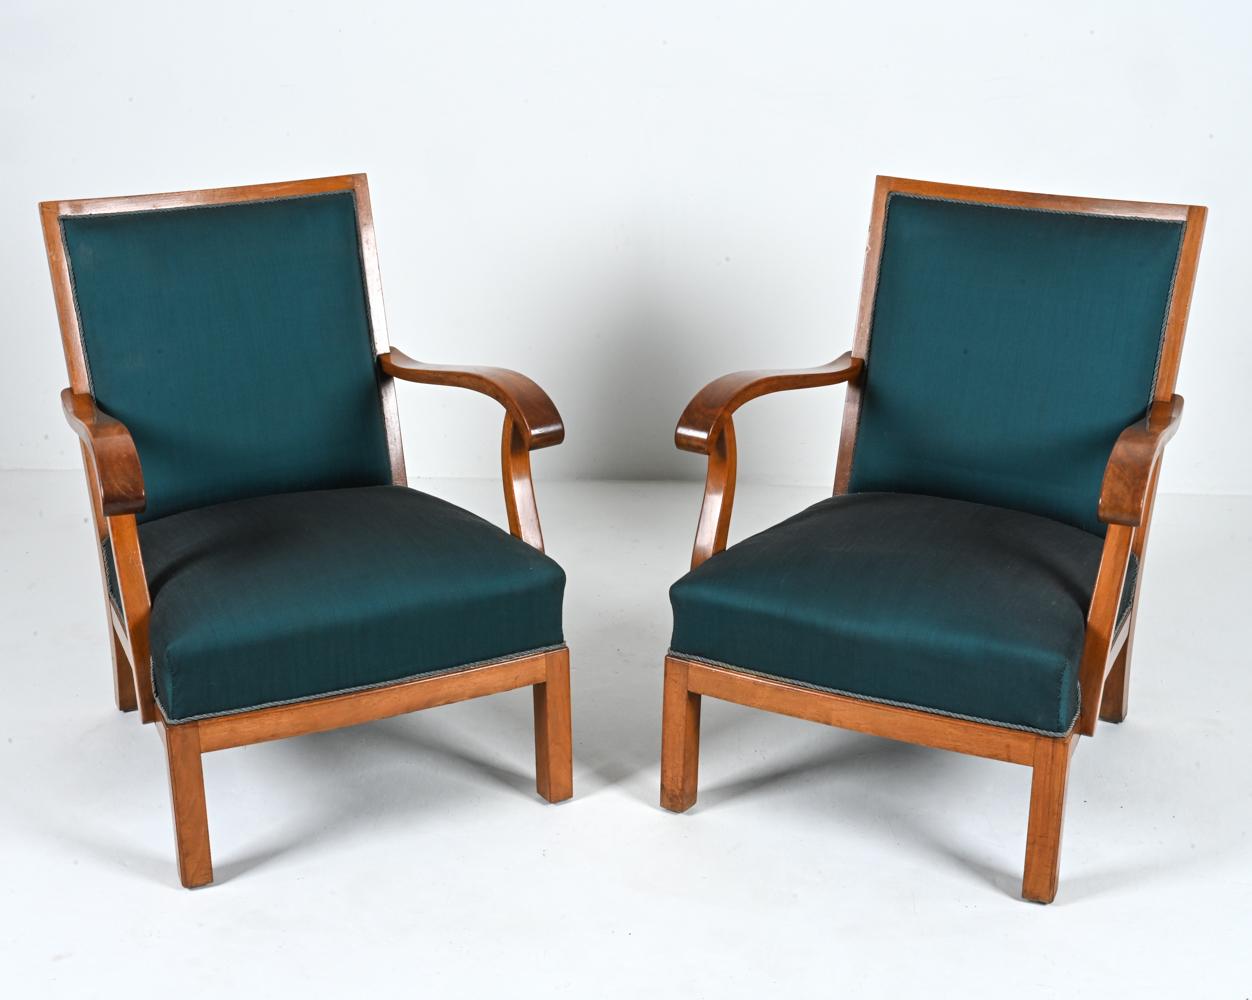 Introducing a rare and exquisite pair of open-arm lounge chairs designed by the renowned Danish craftsman, Erik Wørts, and meticulously produced in Denmark during the 1950's. These exceptional chairs showcase the timeless beauty of mahogany frames,